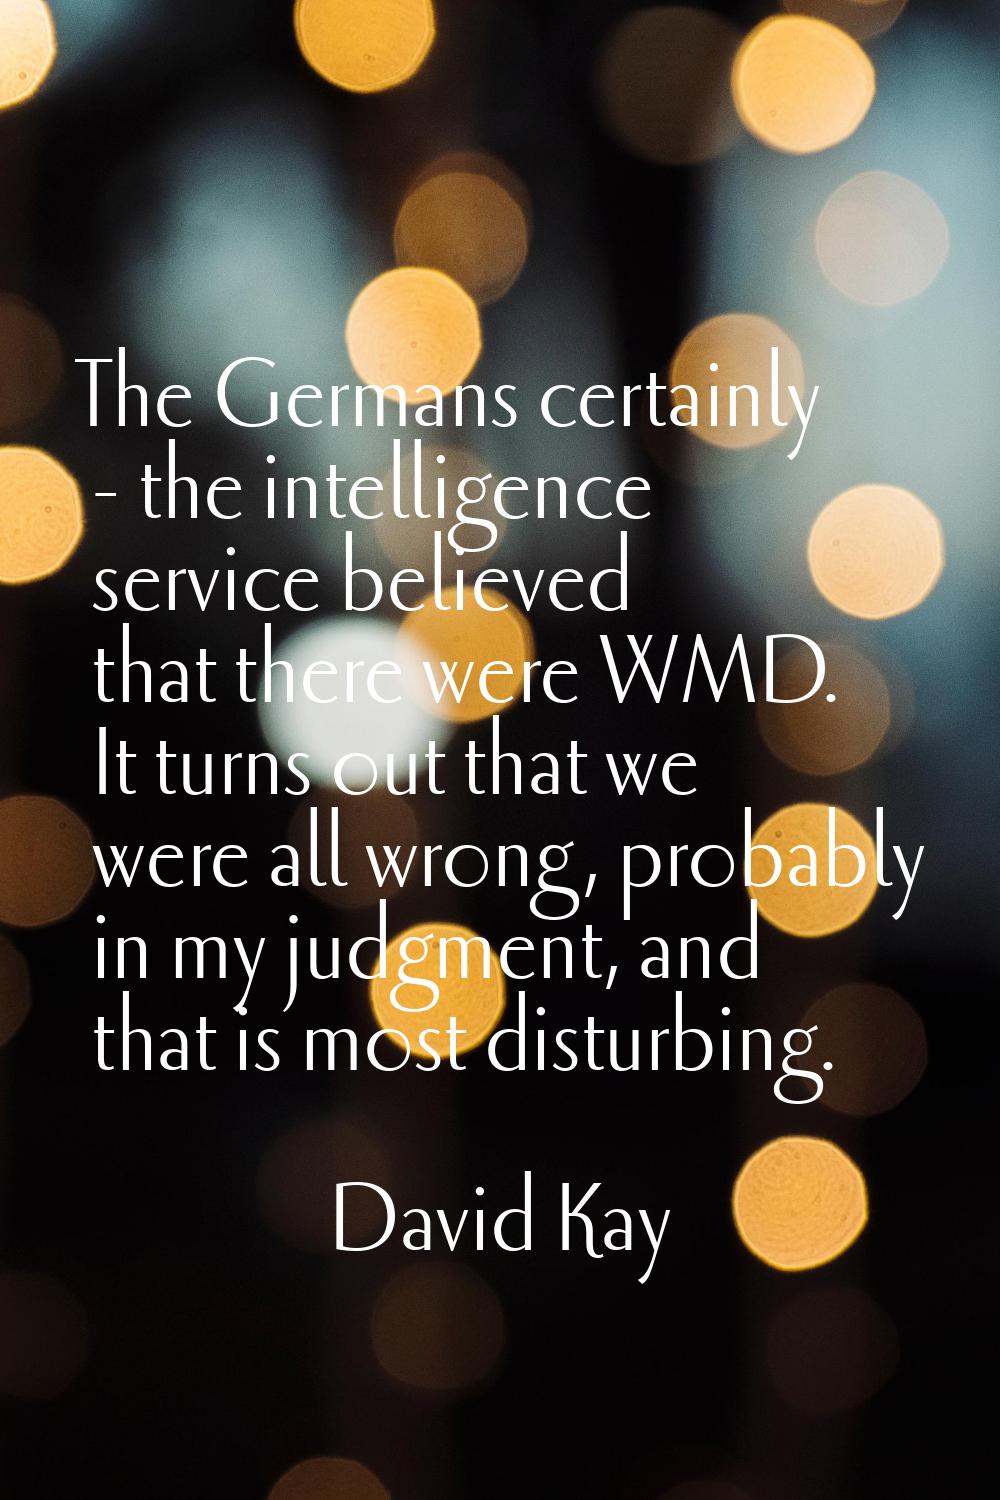 The Germans certainly - the intelligence service believed that there were WMD. It turns out that we